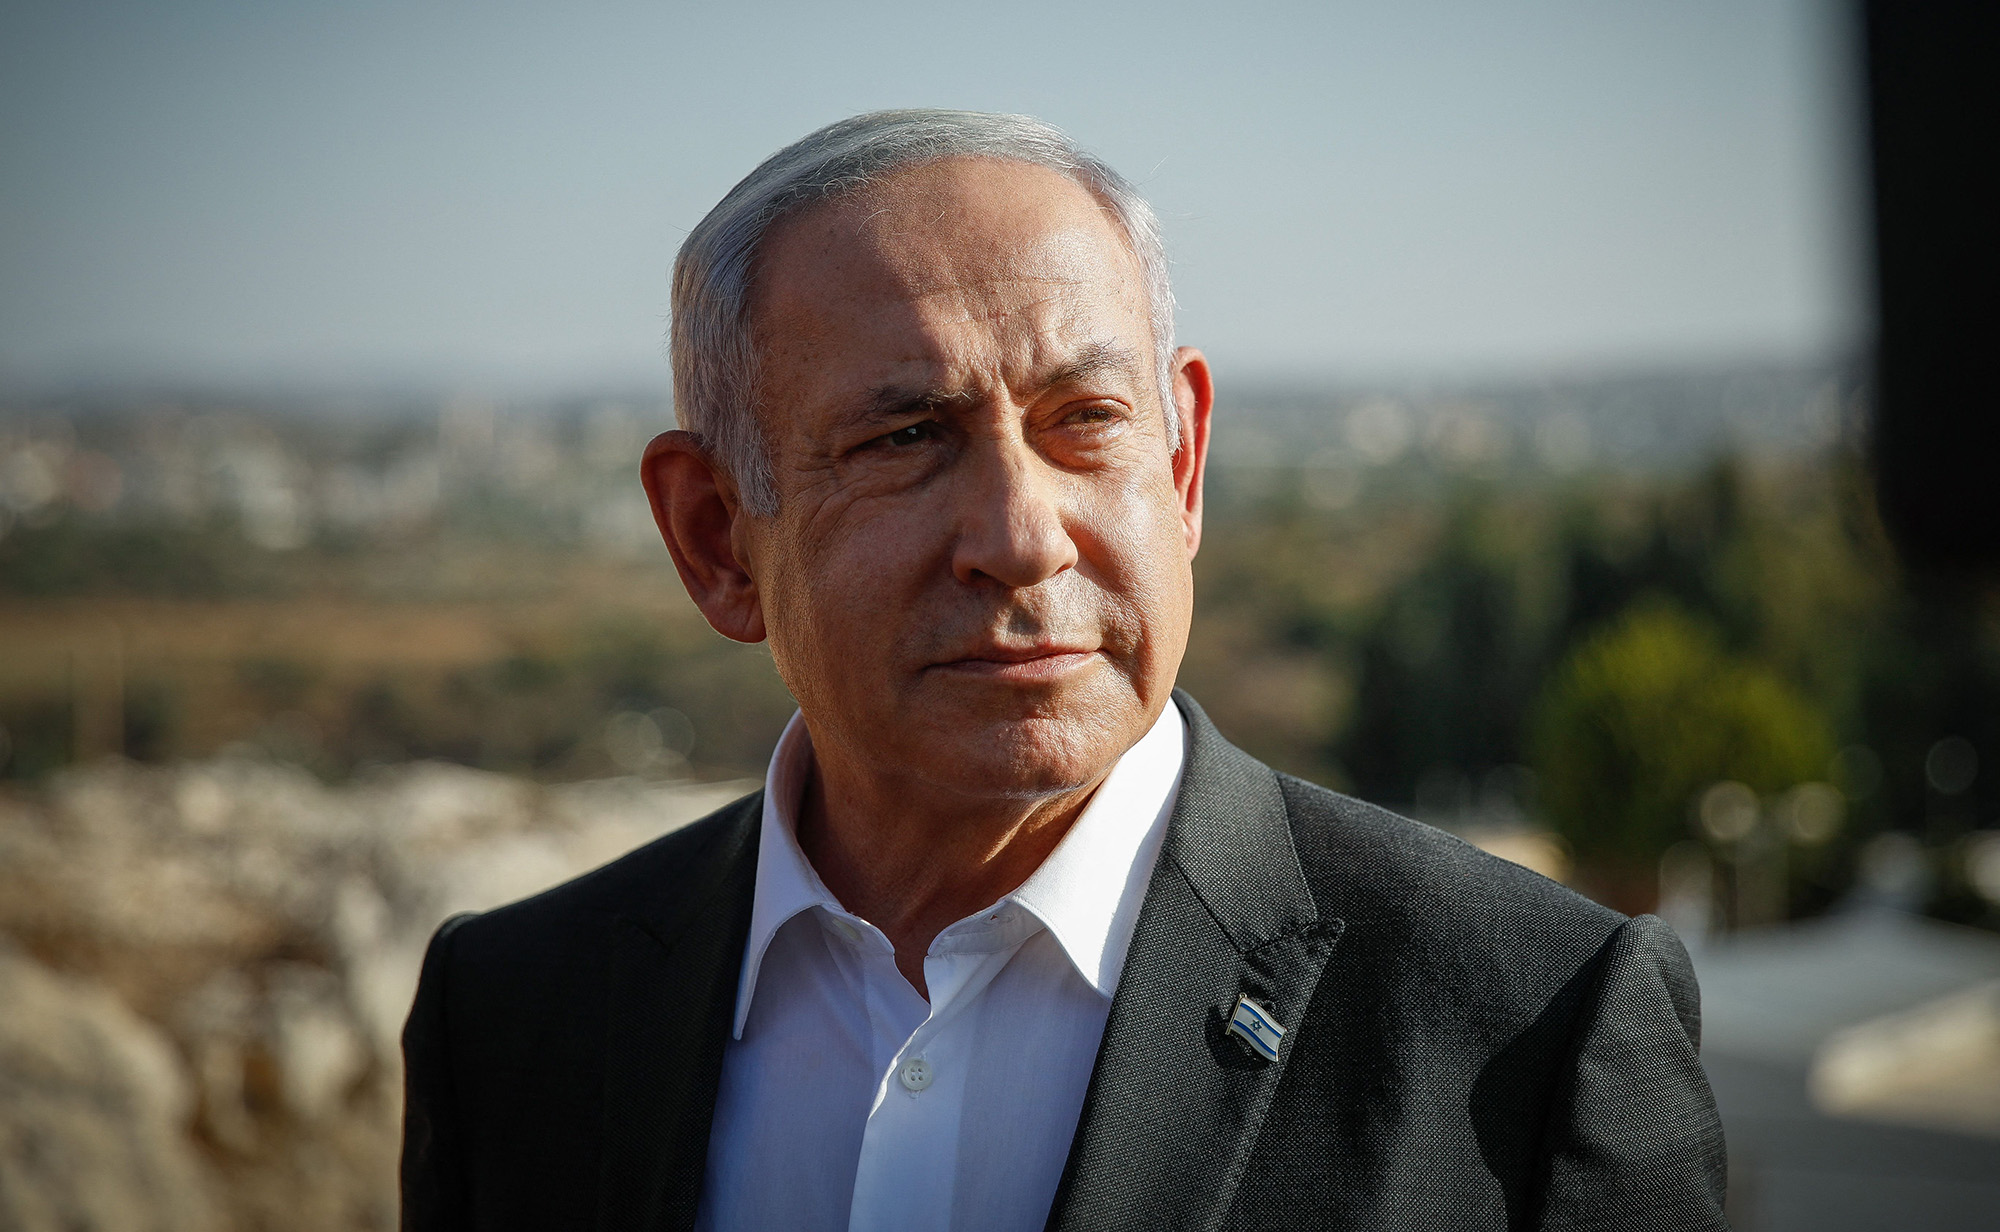 Israeli Prime Minister Benjamin Netanyahu pictured near Salem military post in the occupied West Bank on July 4.